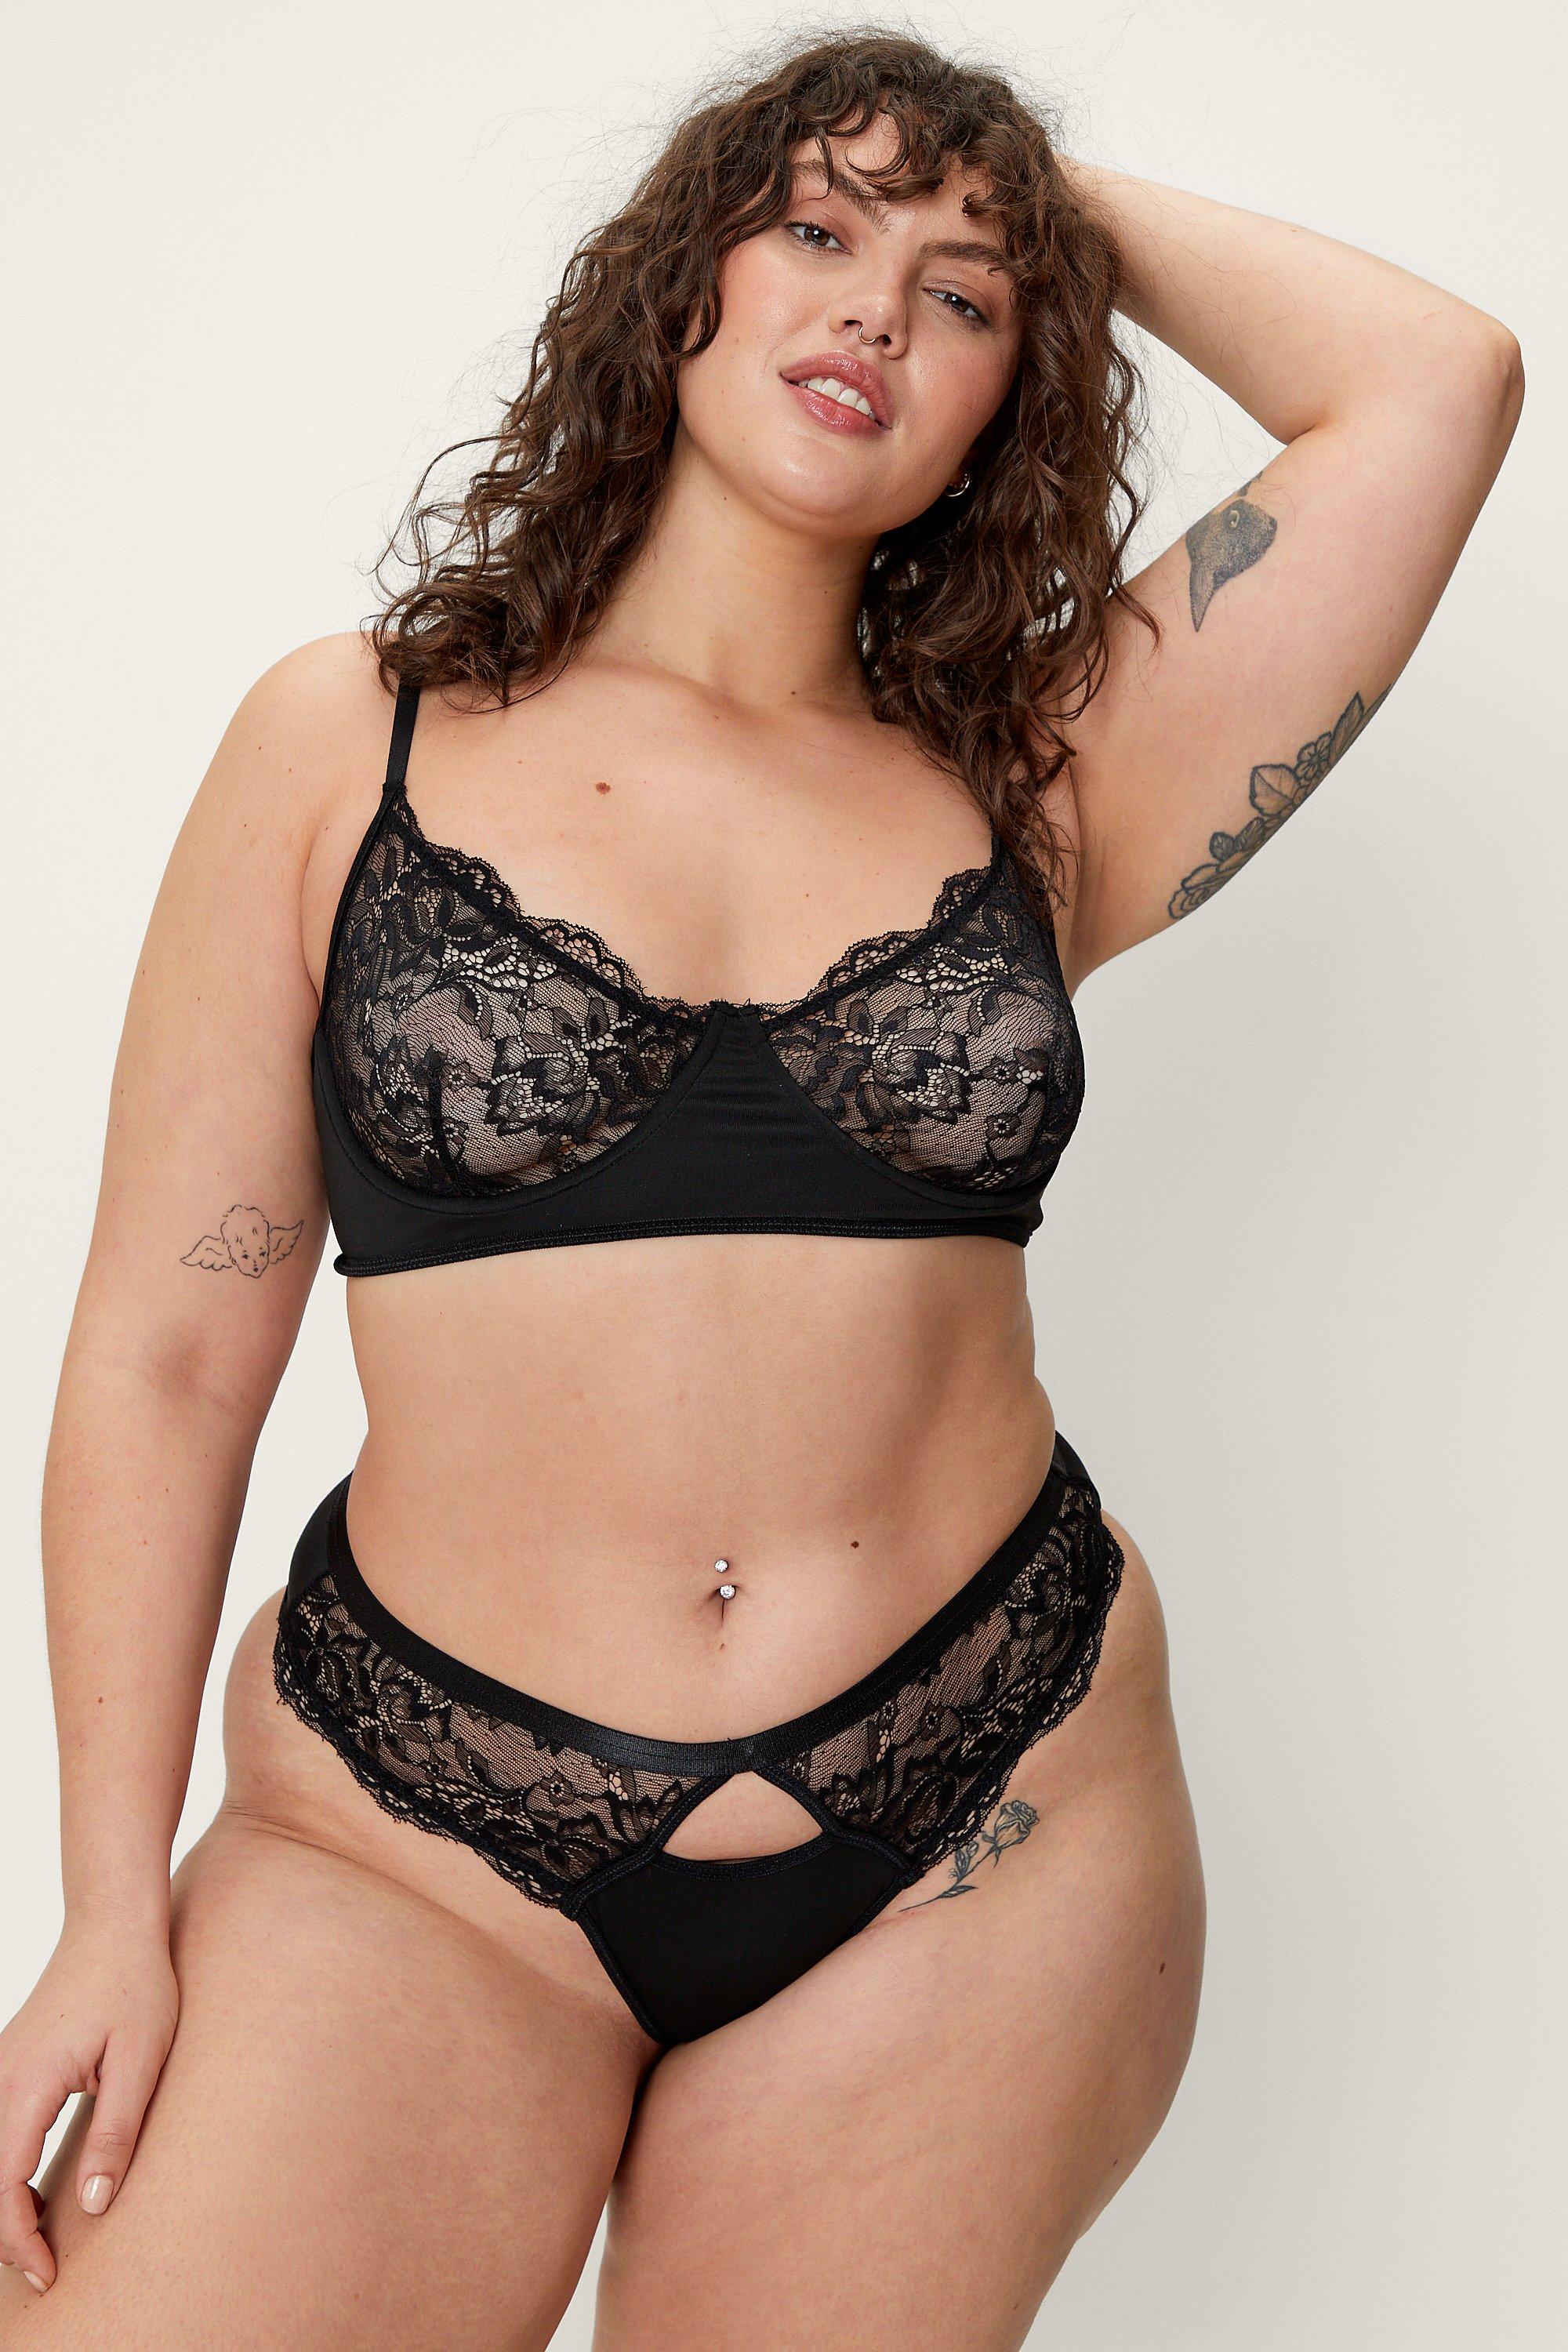 Plus Size Lace Bralette With Underwired Support Full Cup Top Lingerie In  Sizes 40 50 From Deggdenim, $12.9